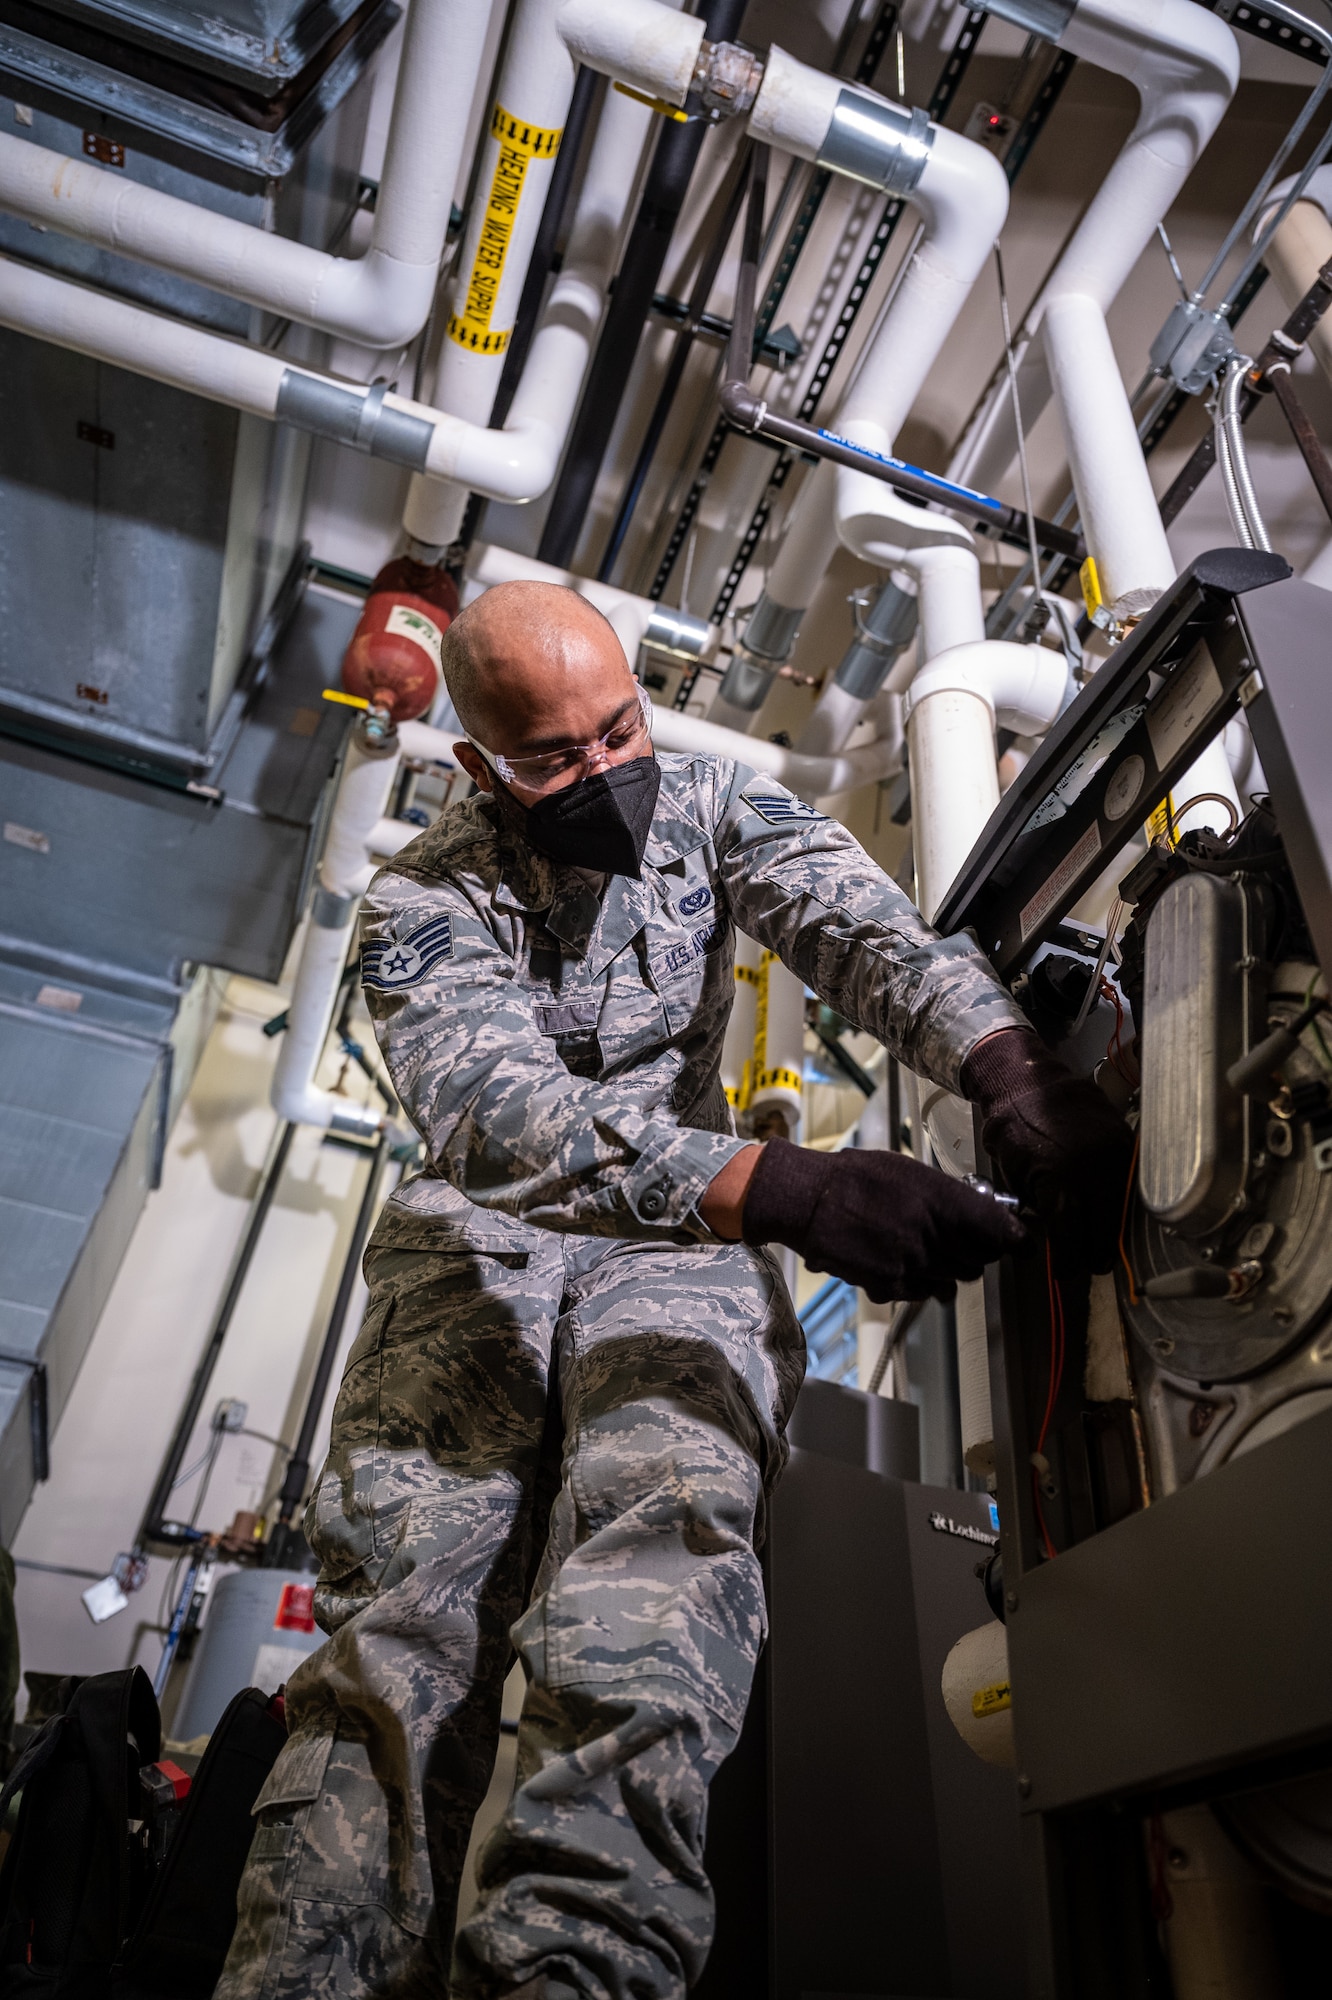 Staff Sgt. Keith Bell, 932nd Civil Engineer Squadron, heating, ventilation, and air conditioning craftsman removes screws holding the heating exchanger of a heating boiler, February 5, 2021, inside building 3651, the 932nd Medical Group building, Scott Air Force Base, Illinois.  The boiler requires annual maintenance, and the CES HVAC Airman were able to perform the maintenance to maintain their own readiness and support operations here at SAFB. (U.S. Air Force photo by Christopher Parr)